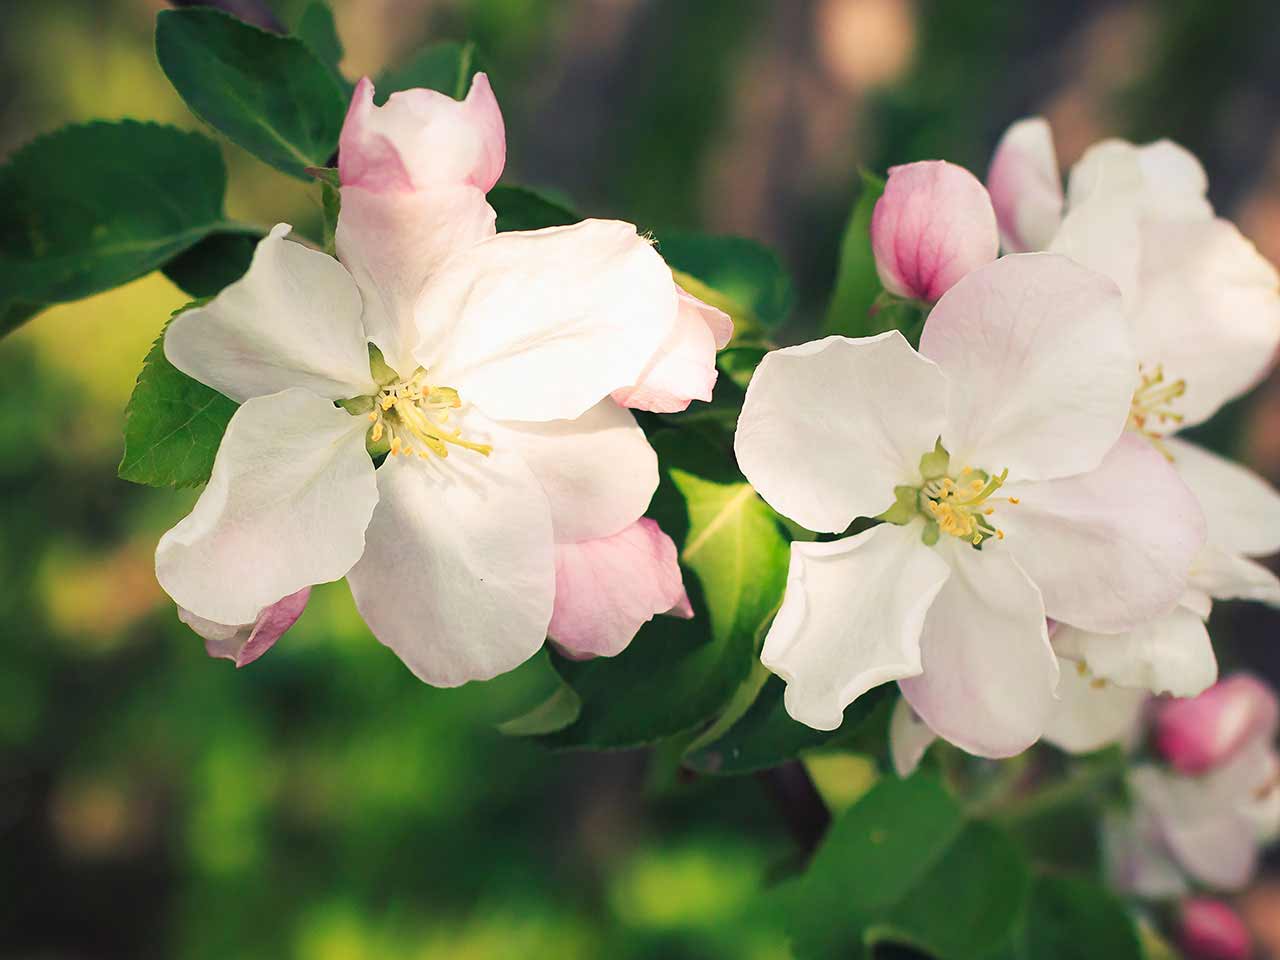 Blooming apple blossom